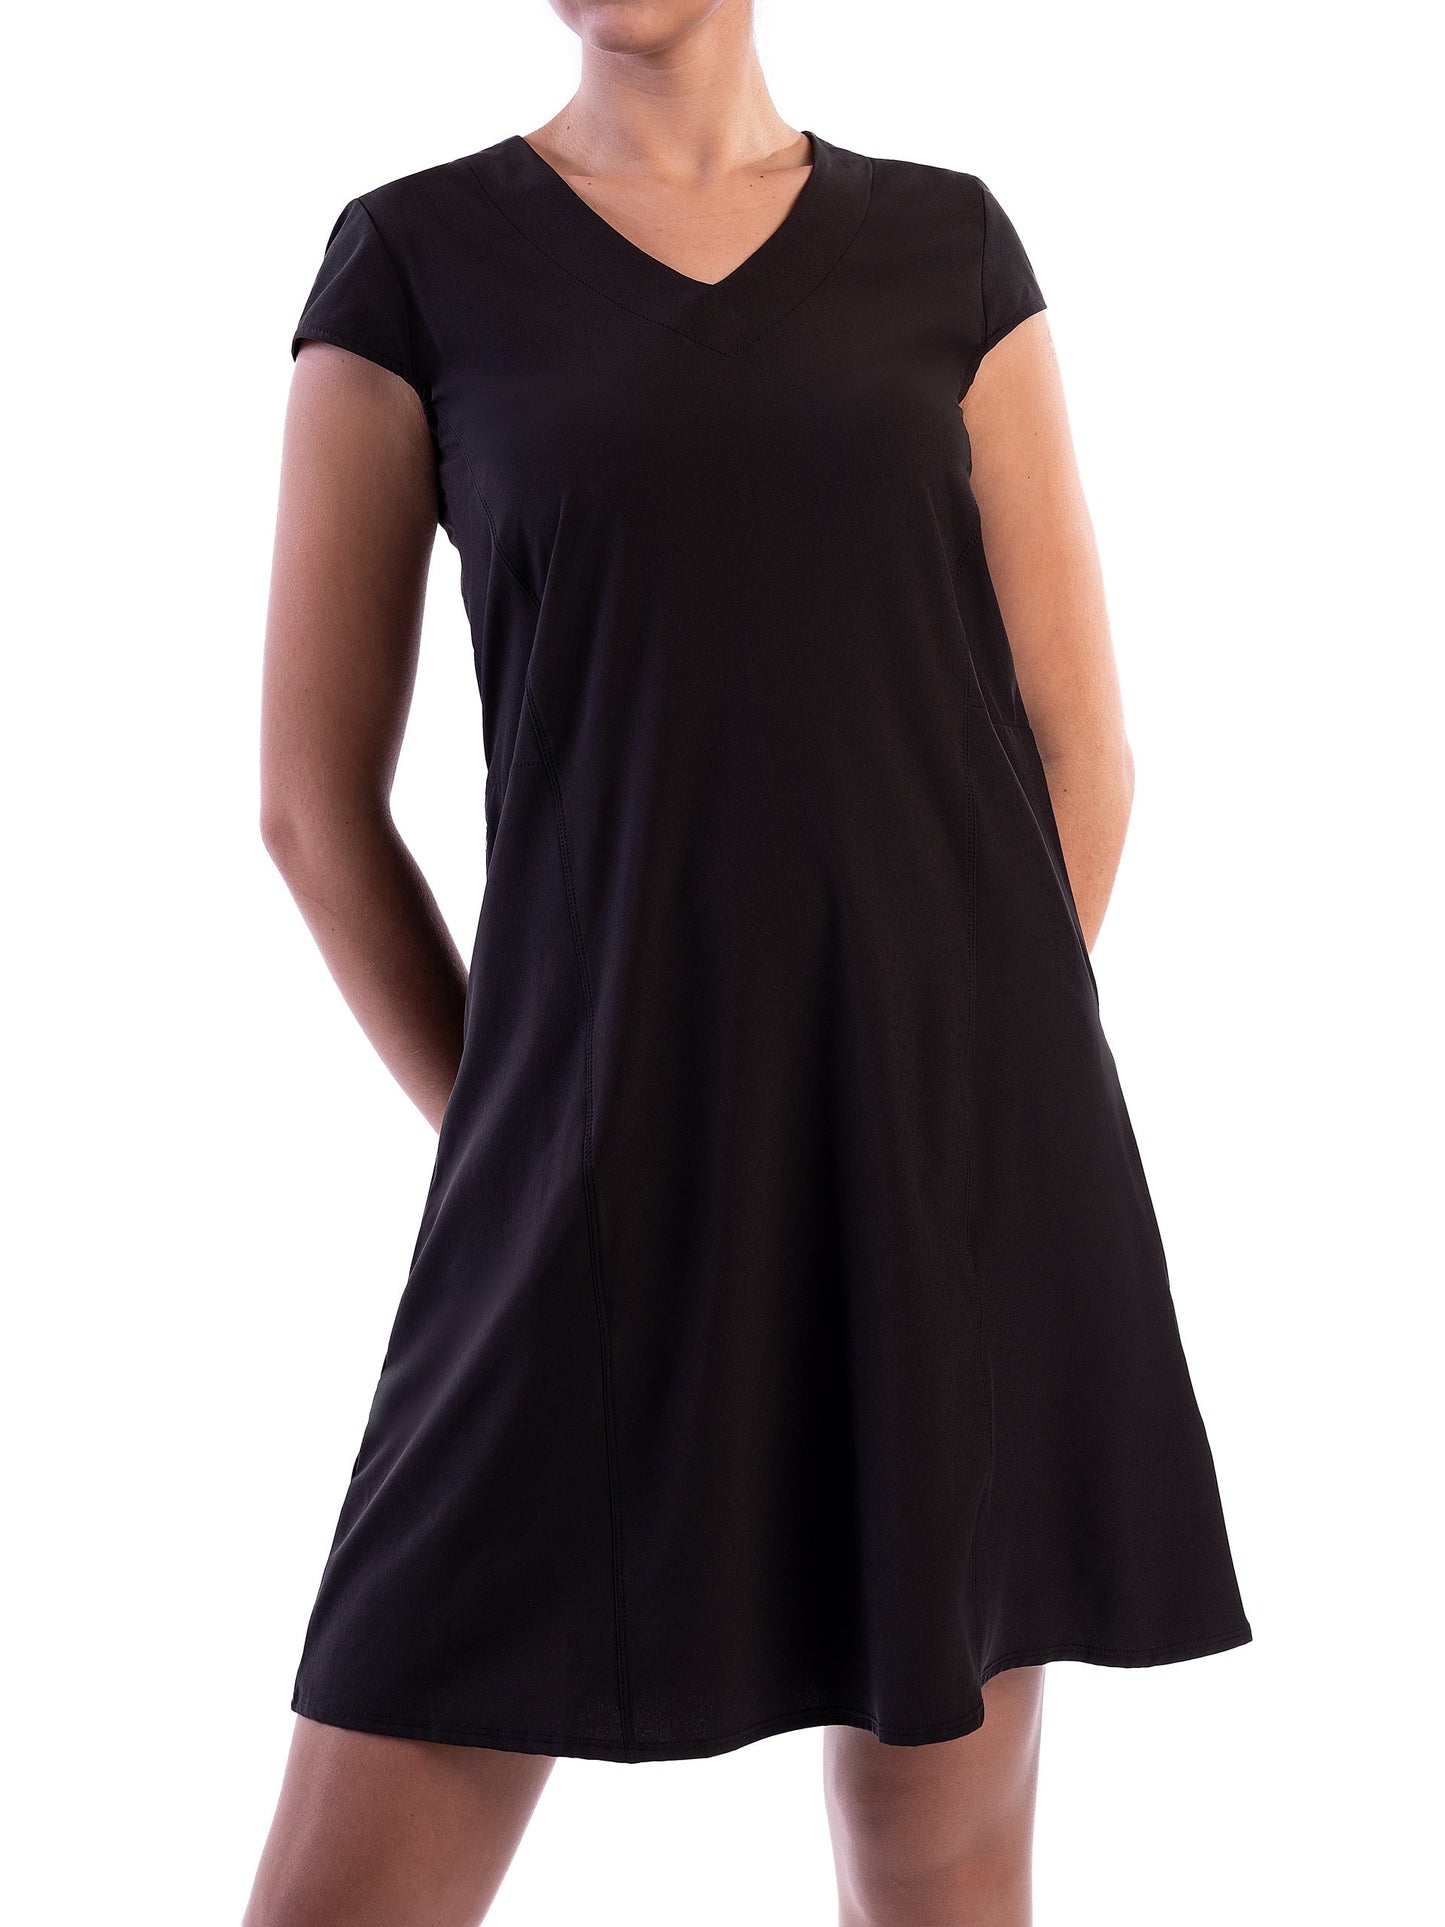 DOROTHY | Women's Loose Fitting Travel Dress with Hidden Pockets ...